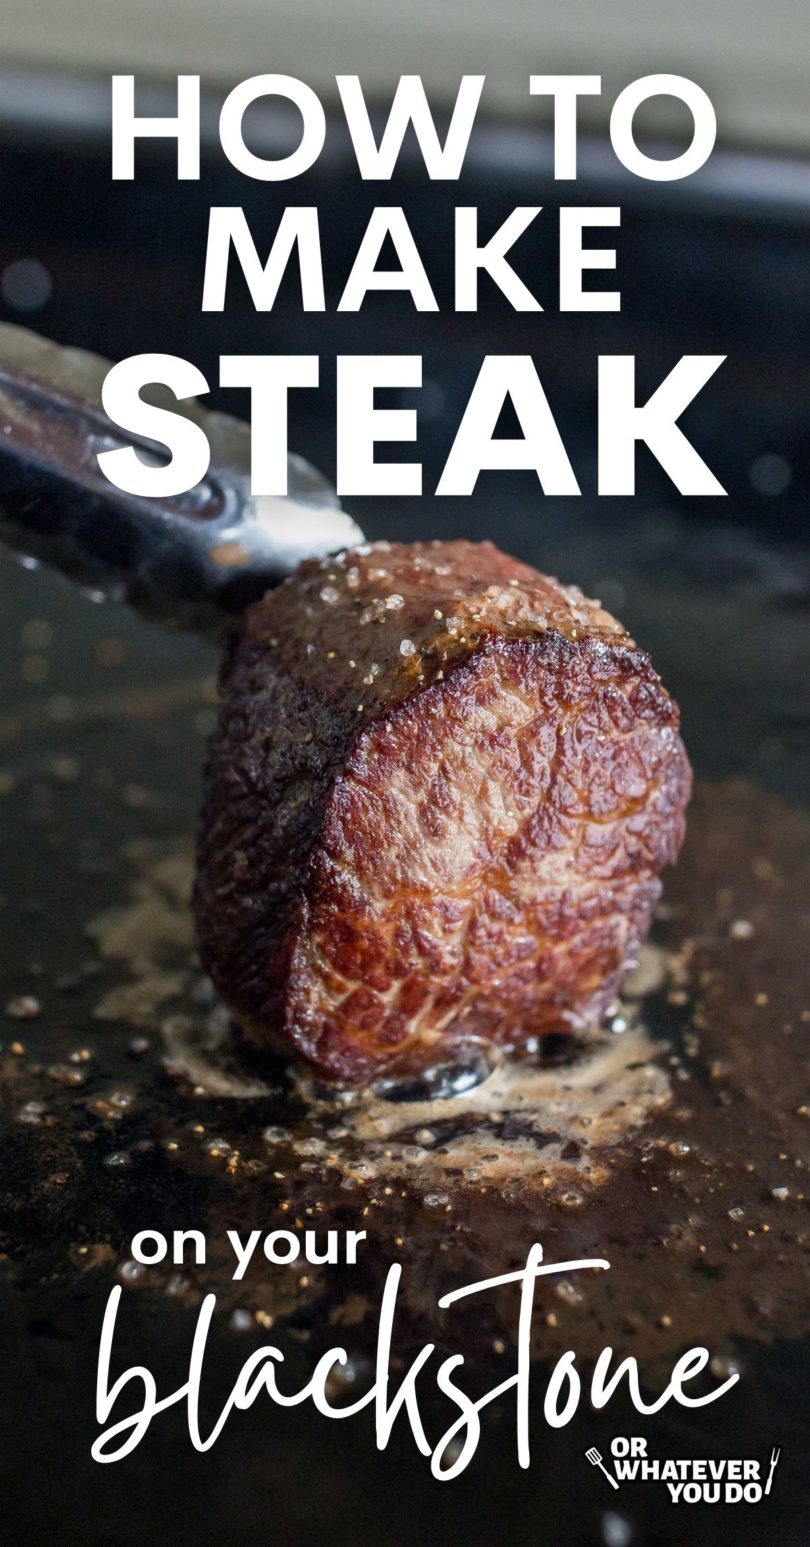 How to Grill Steak on an Electric Grill